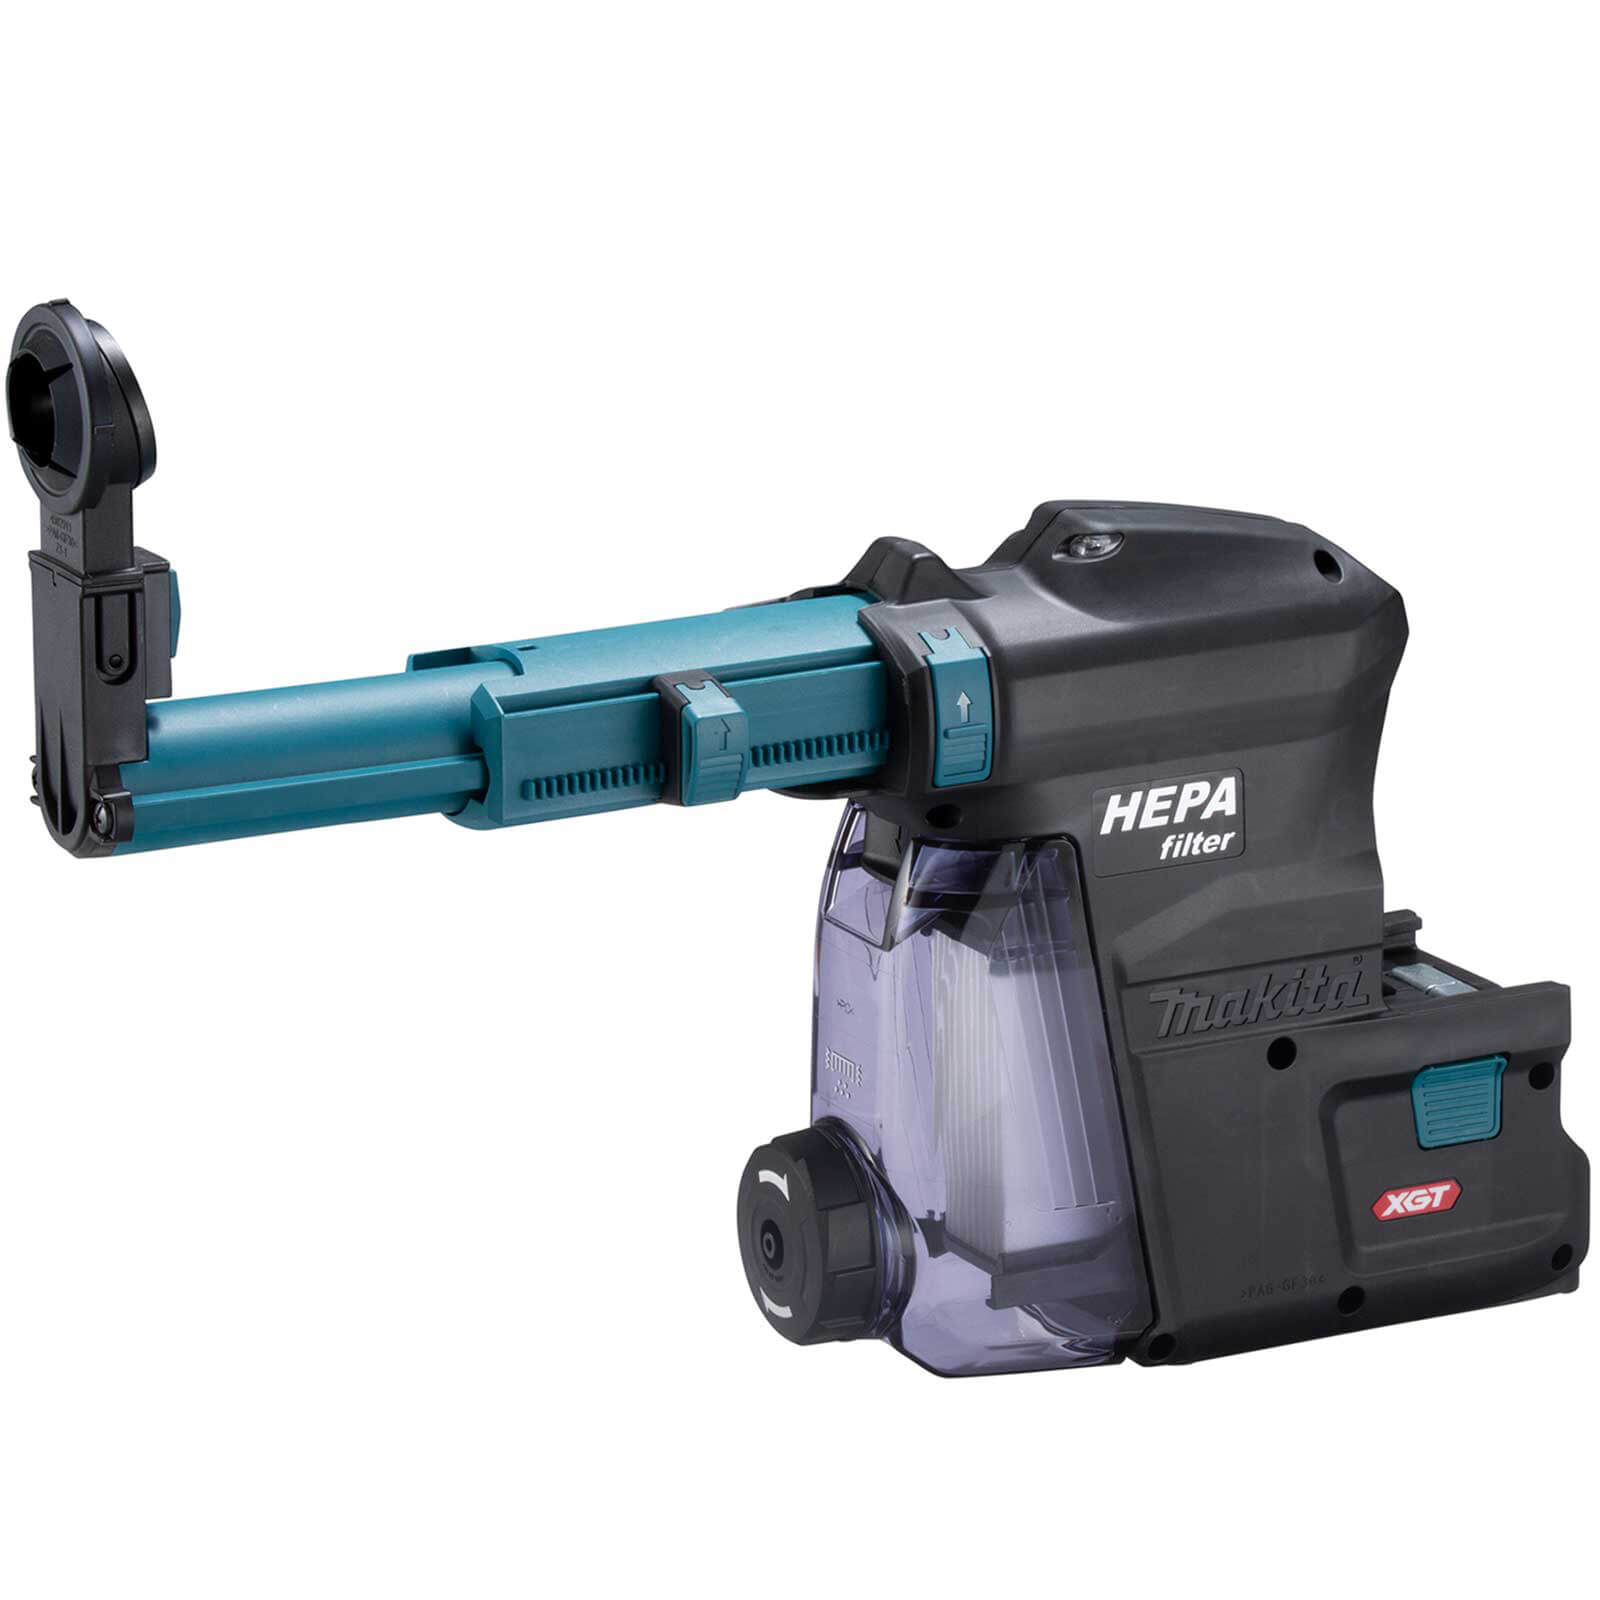 Photo of Makita Dx12 Xgt Dust Extraction Attachment